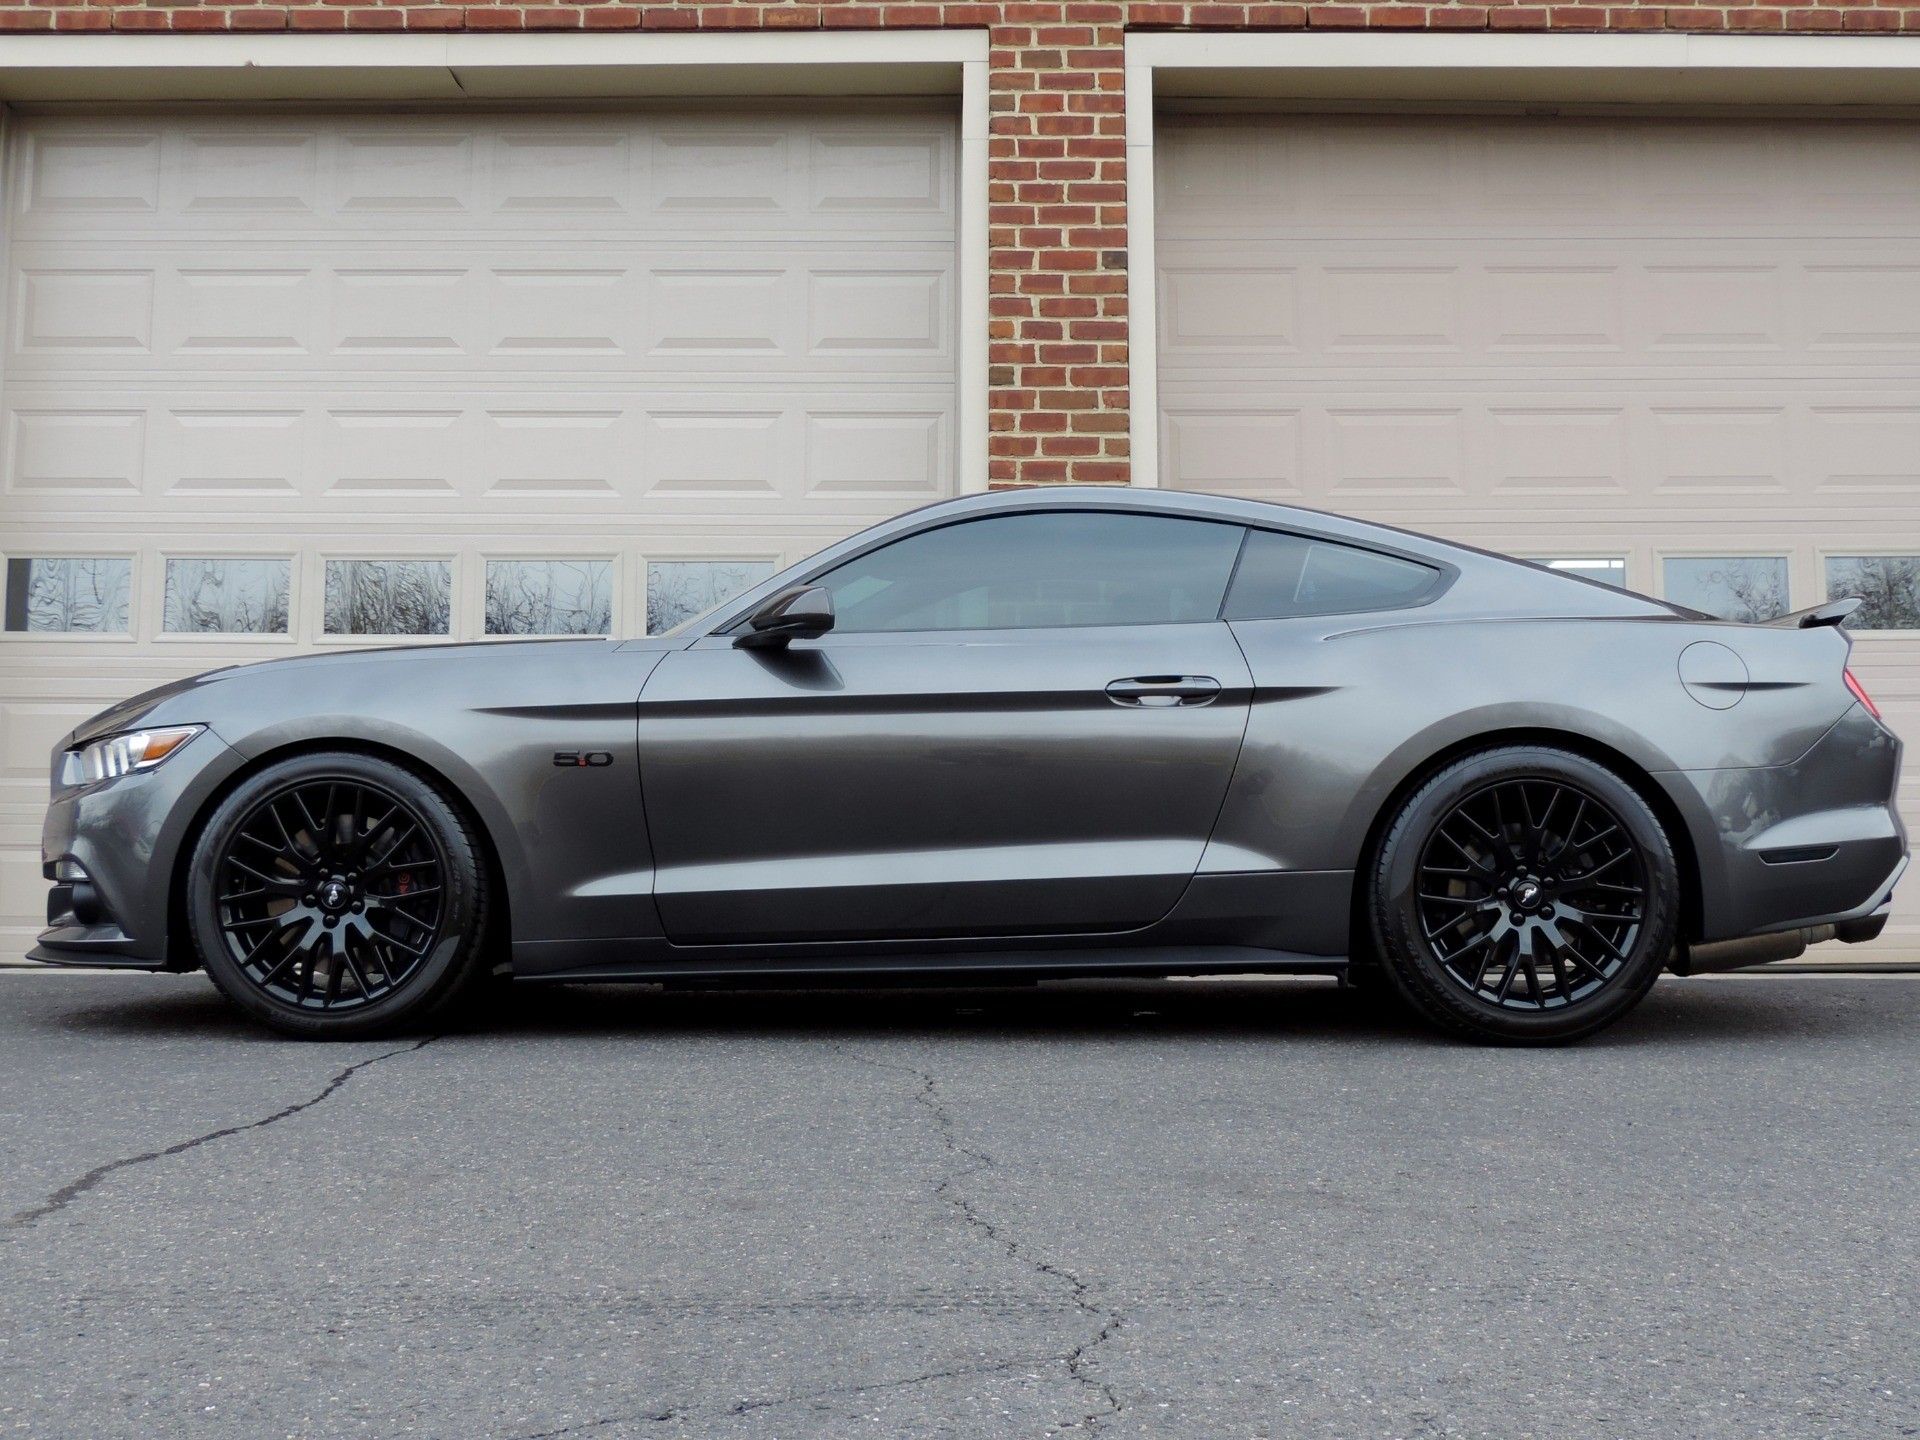 New Mustang Factory Black Rims And New Tires Performance Package Staggered Wheels PP 19” 19 inch